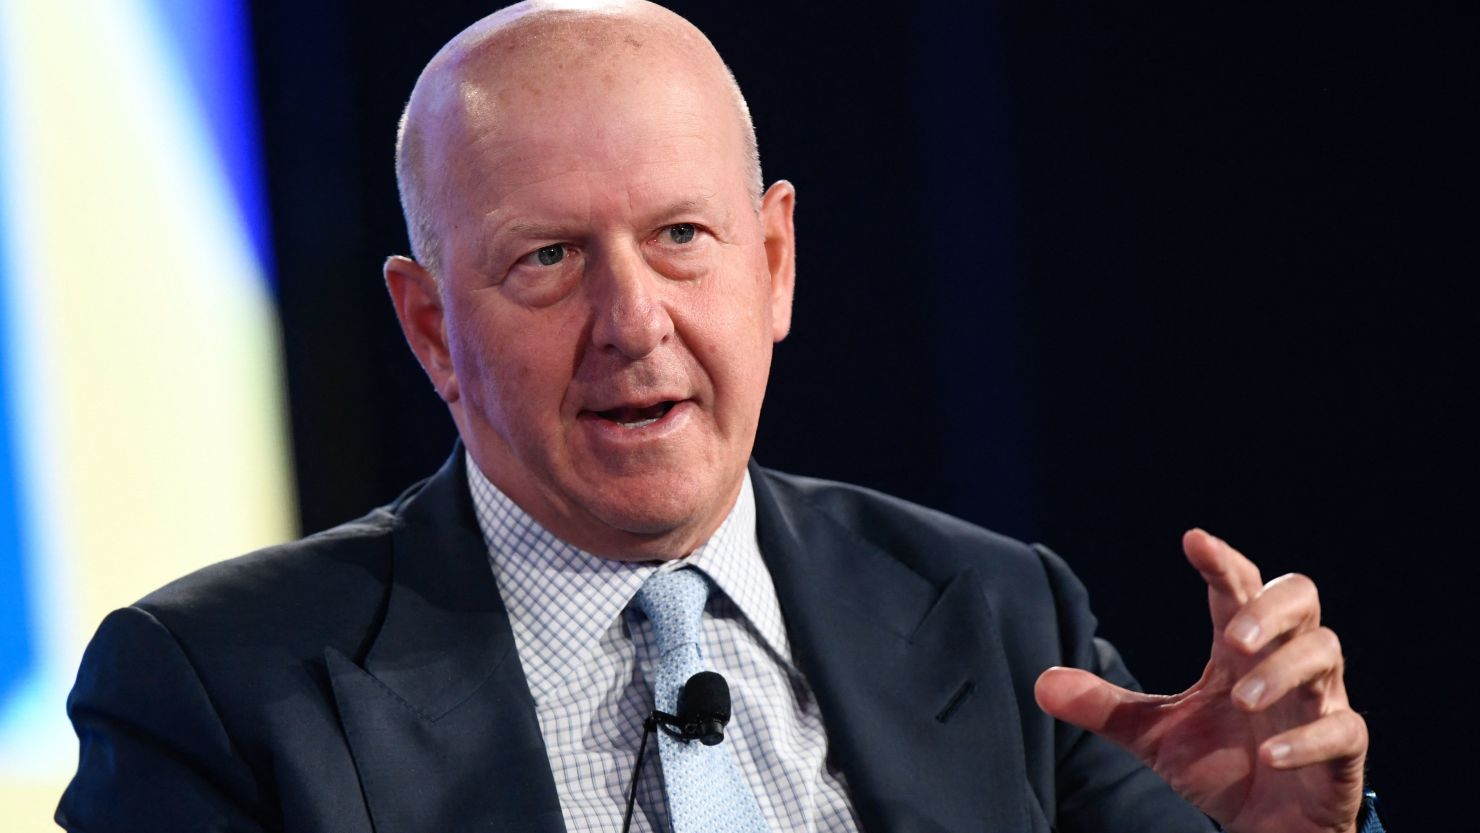 David Solomon, Chairman and CEO, Goldman Sachs, speaks during the Milken Institute Global Conference on May 2, 2022 in Beverly Hills, California.